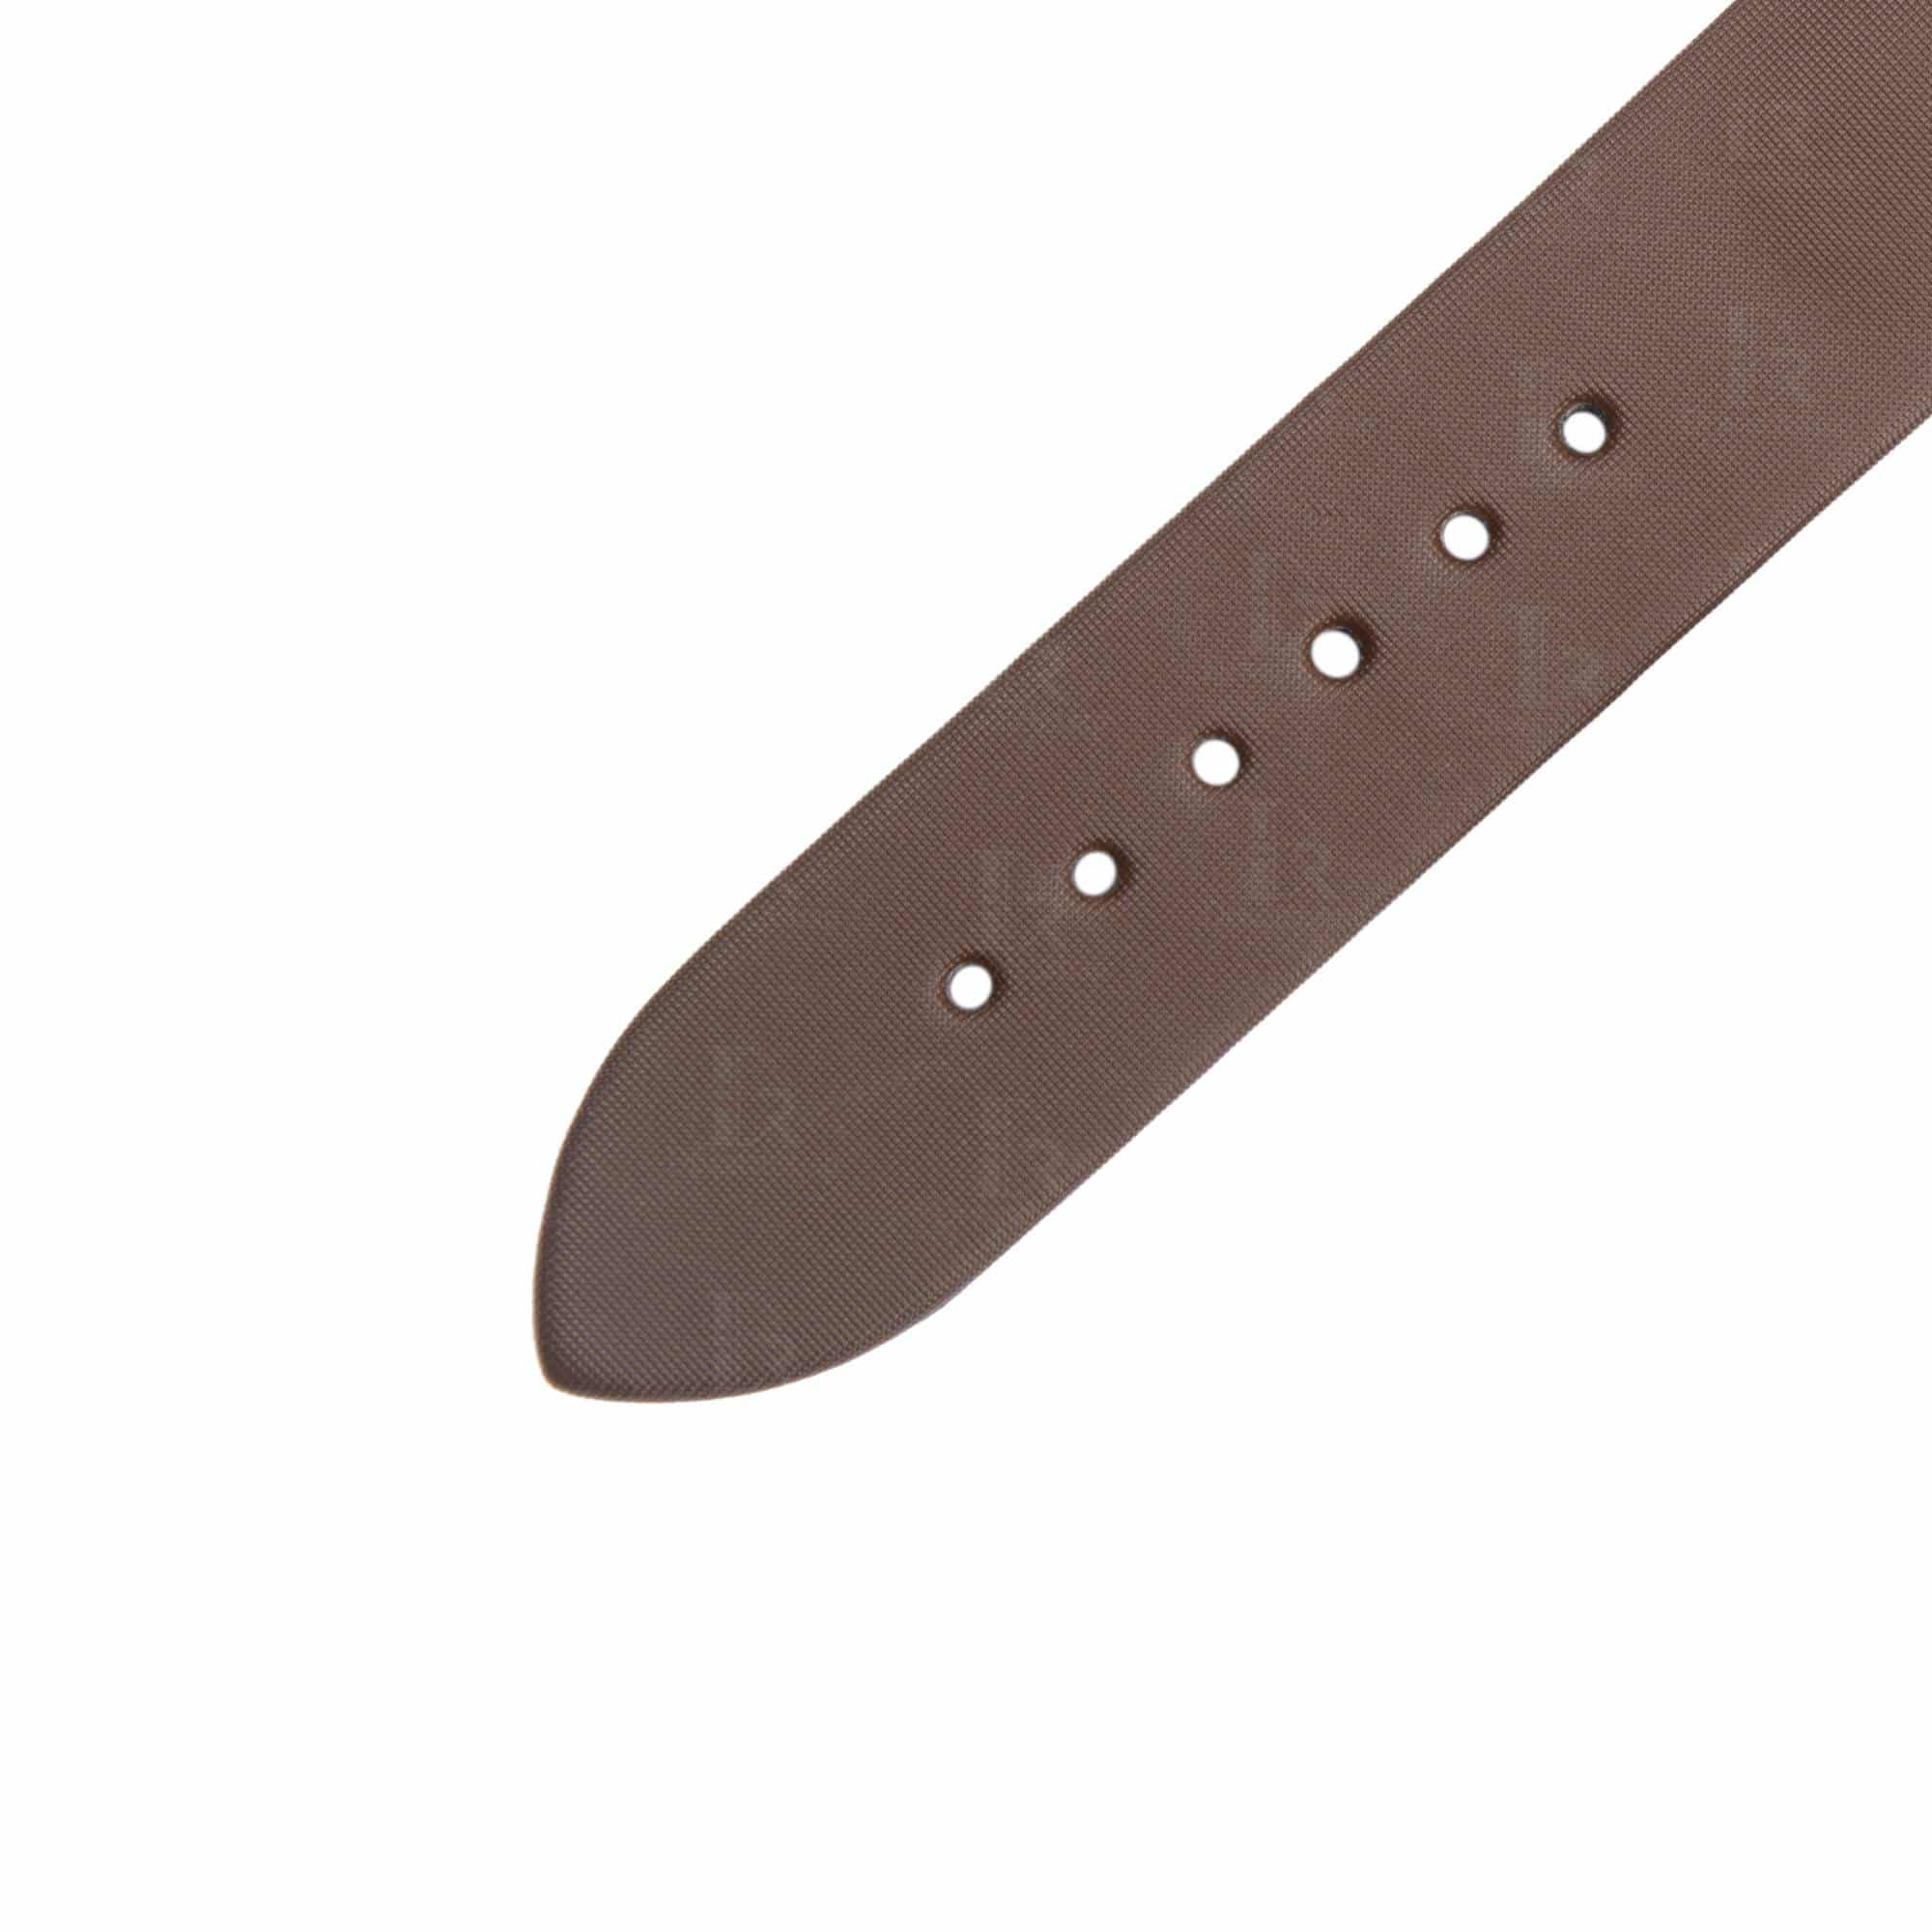 Best quality OEM premium Satin material brown leather watch straps and watch bands replacement for Glashutte Original Ladies Serenade luxury watches - Shop high-end handmade satin strap and watch band at a low price